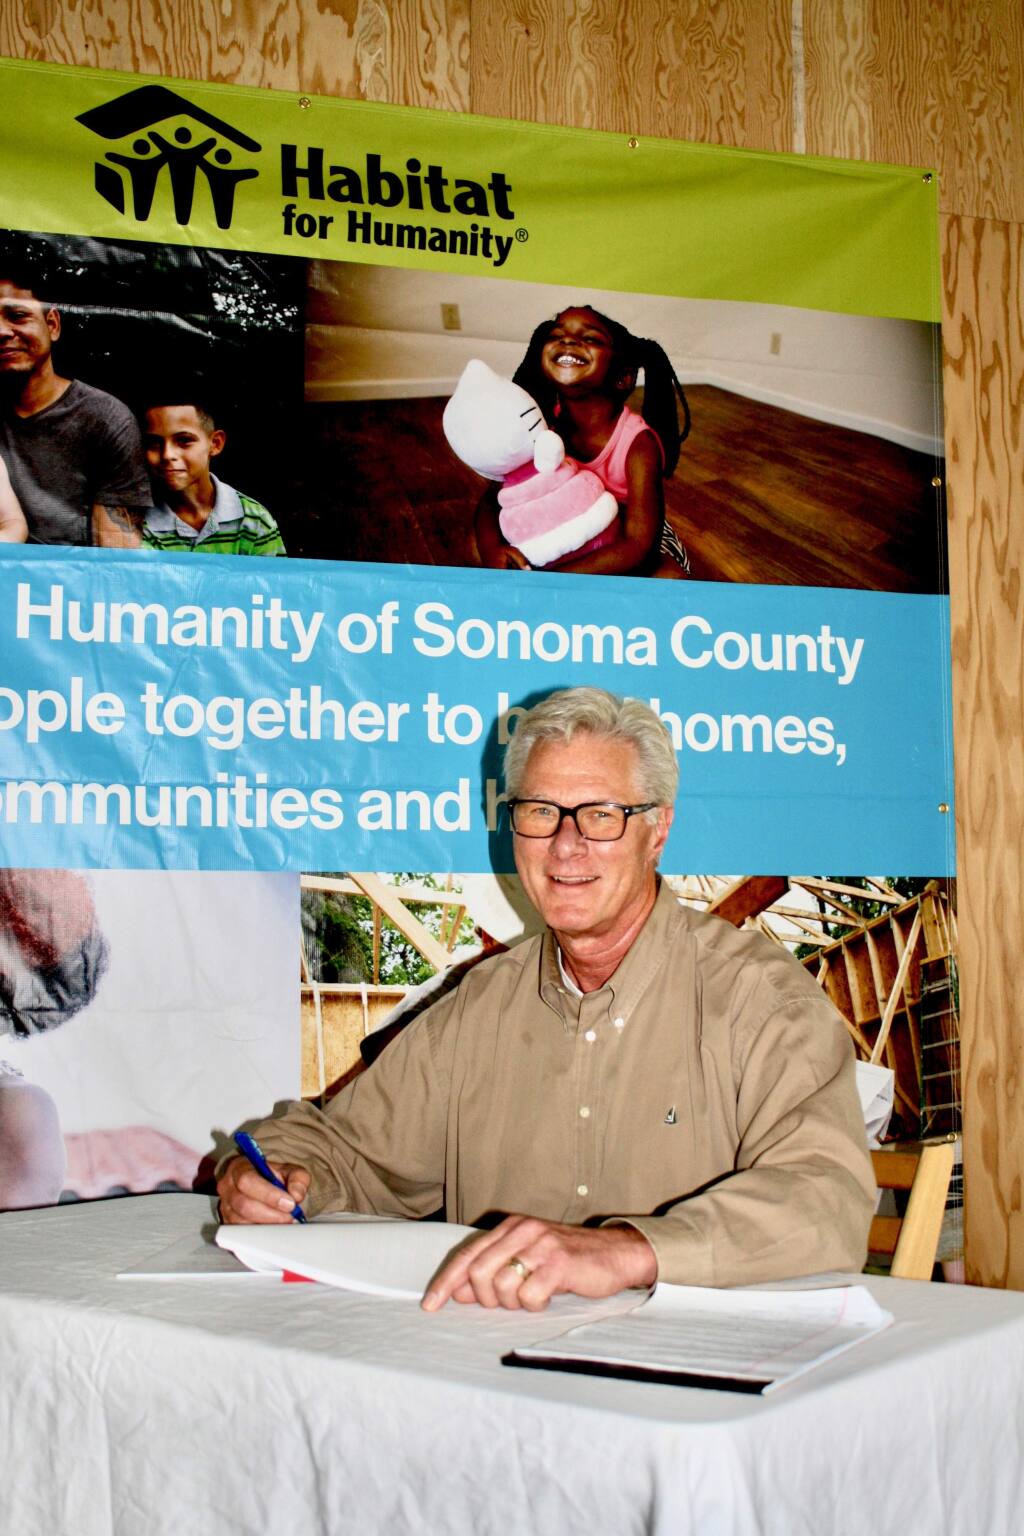 Sonoma County Habitat for Humanity Chairman Tim Leach on Thursday, May 23, 2019, signs the lease for 65,000 square feet of indoor and outdoor manufacturing and storage space at SOMO Village in Rohnert Park. (Gary Quackenbush / for North Bay Business Journal)